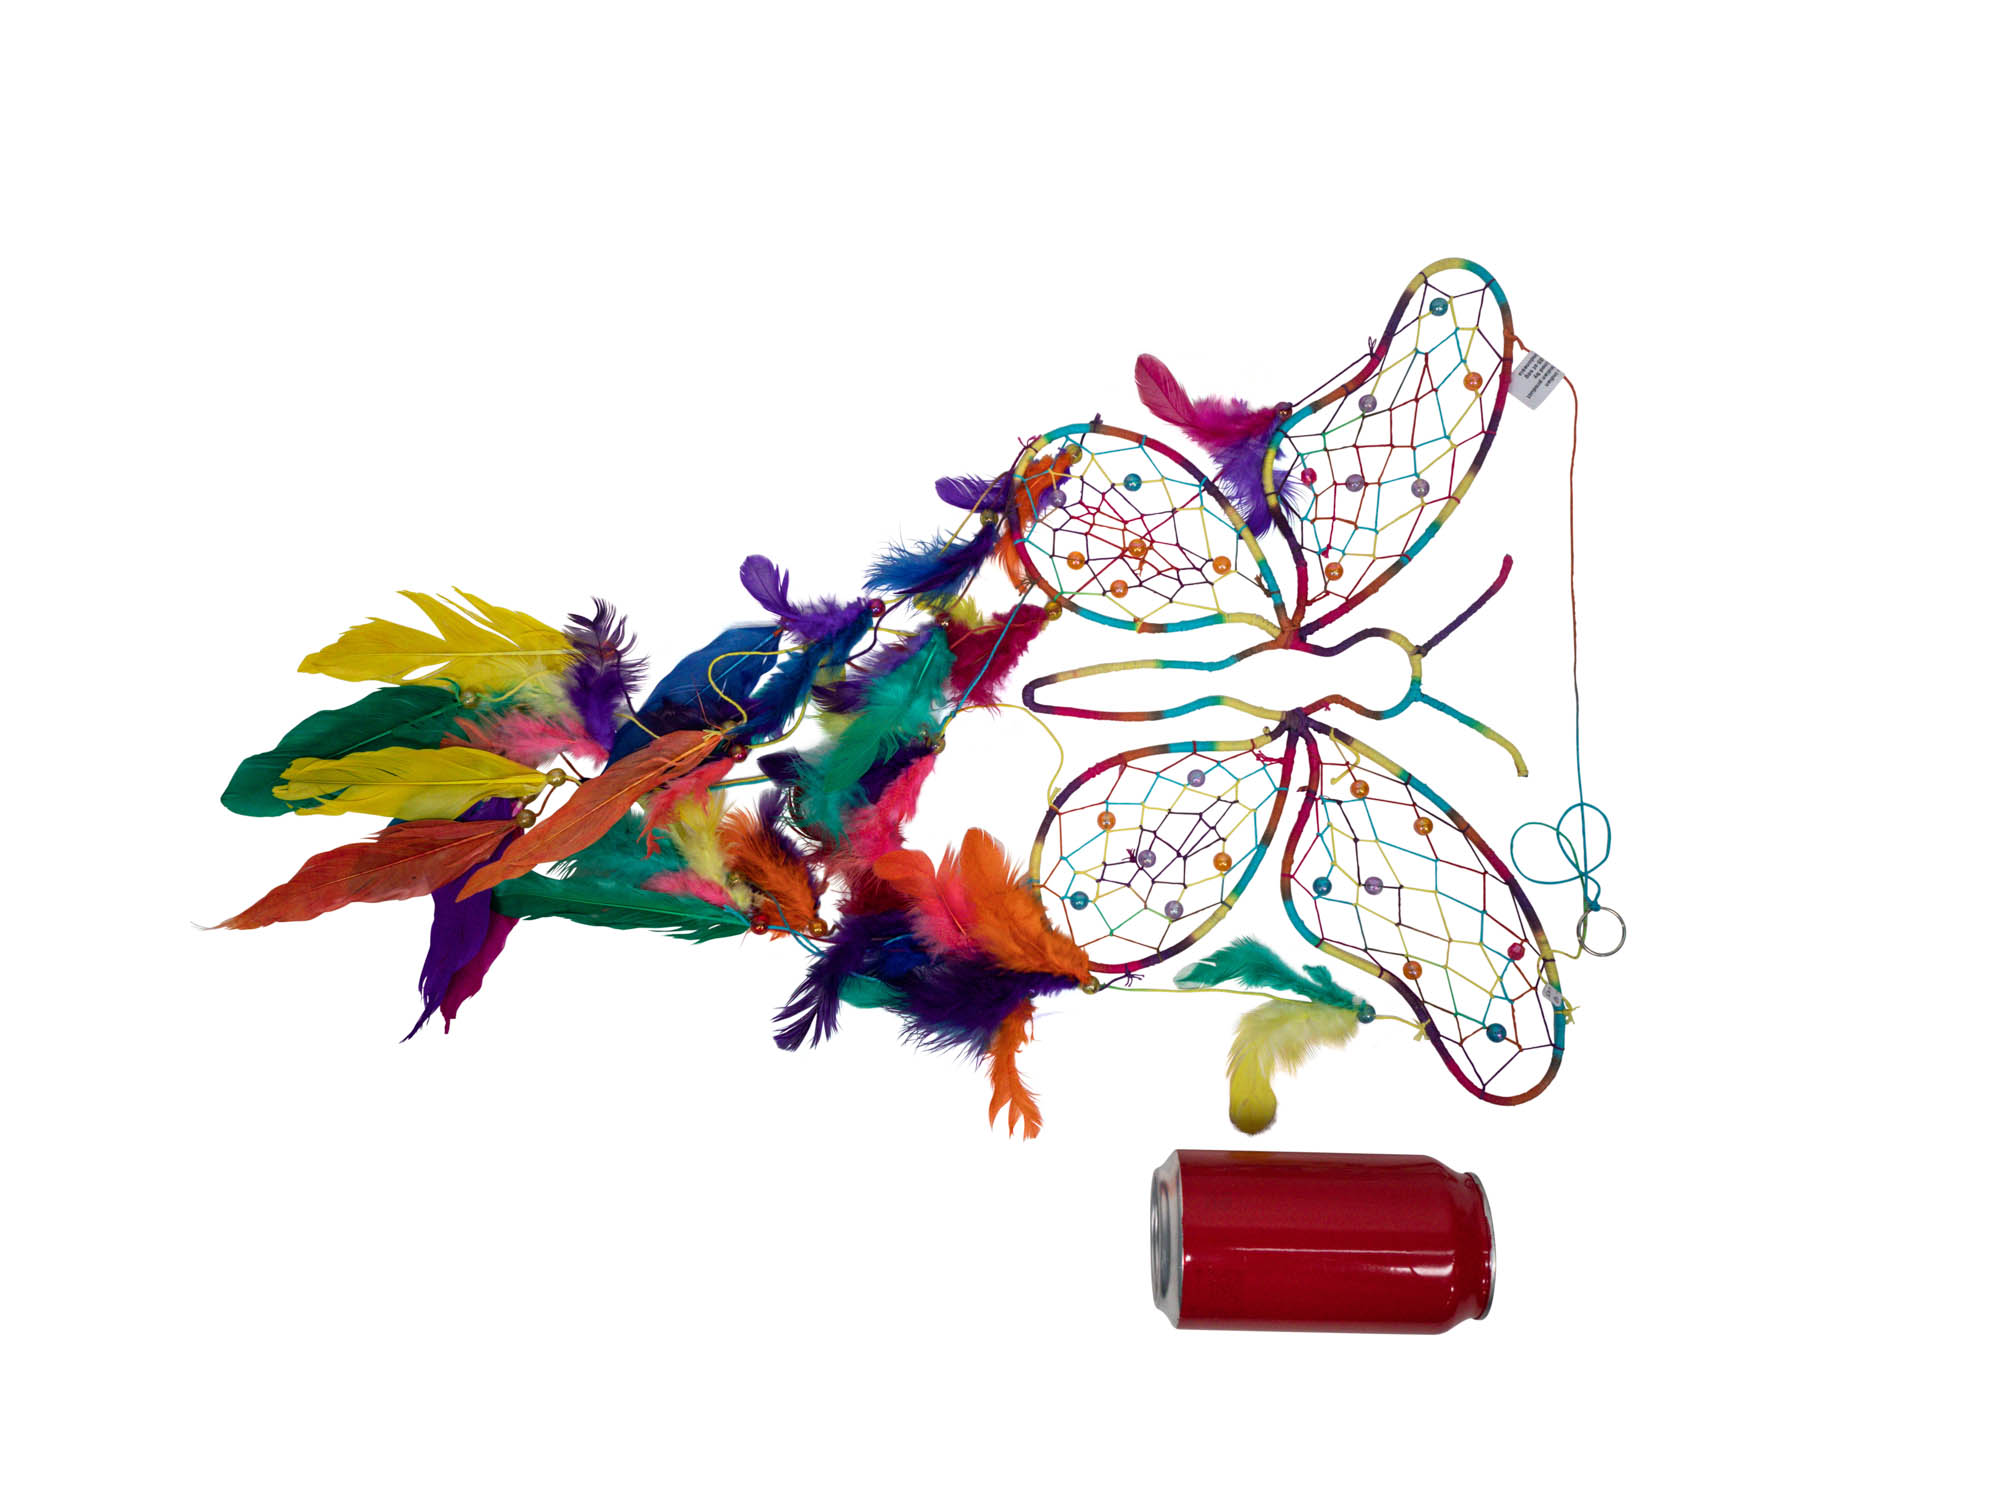 DreamCatcher Kit – Butterfly Express Quality Essential Oils